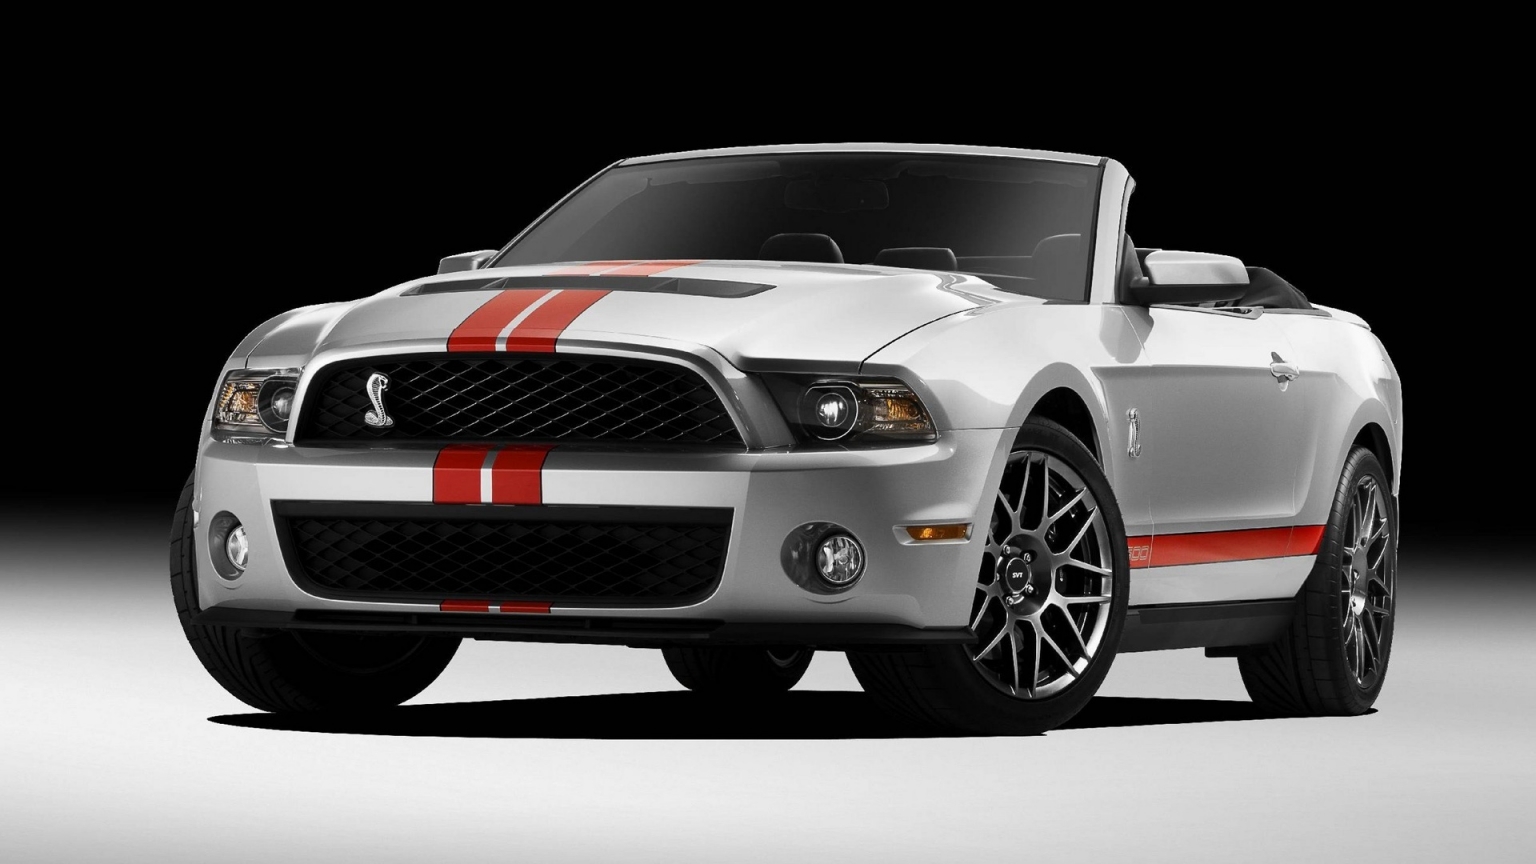 Ford Shelby GT500 Convertible 2010 for 1536 x 864 HDTV resolution